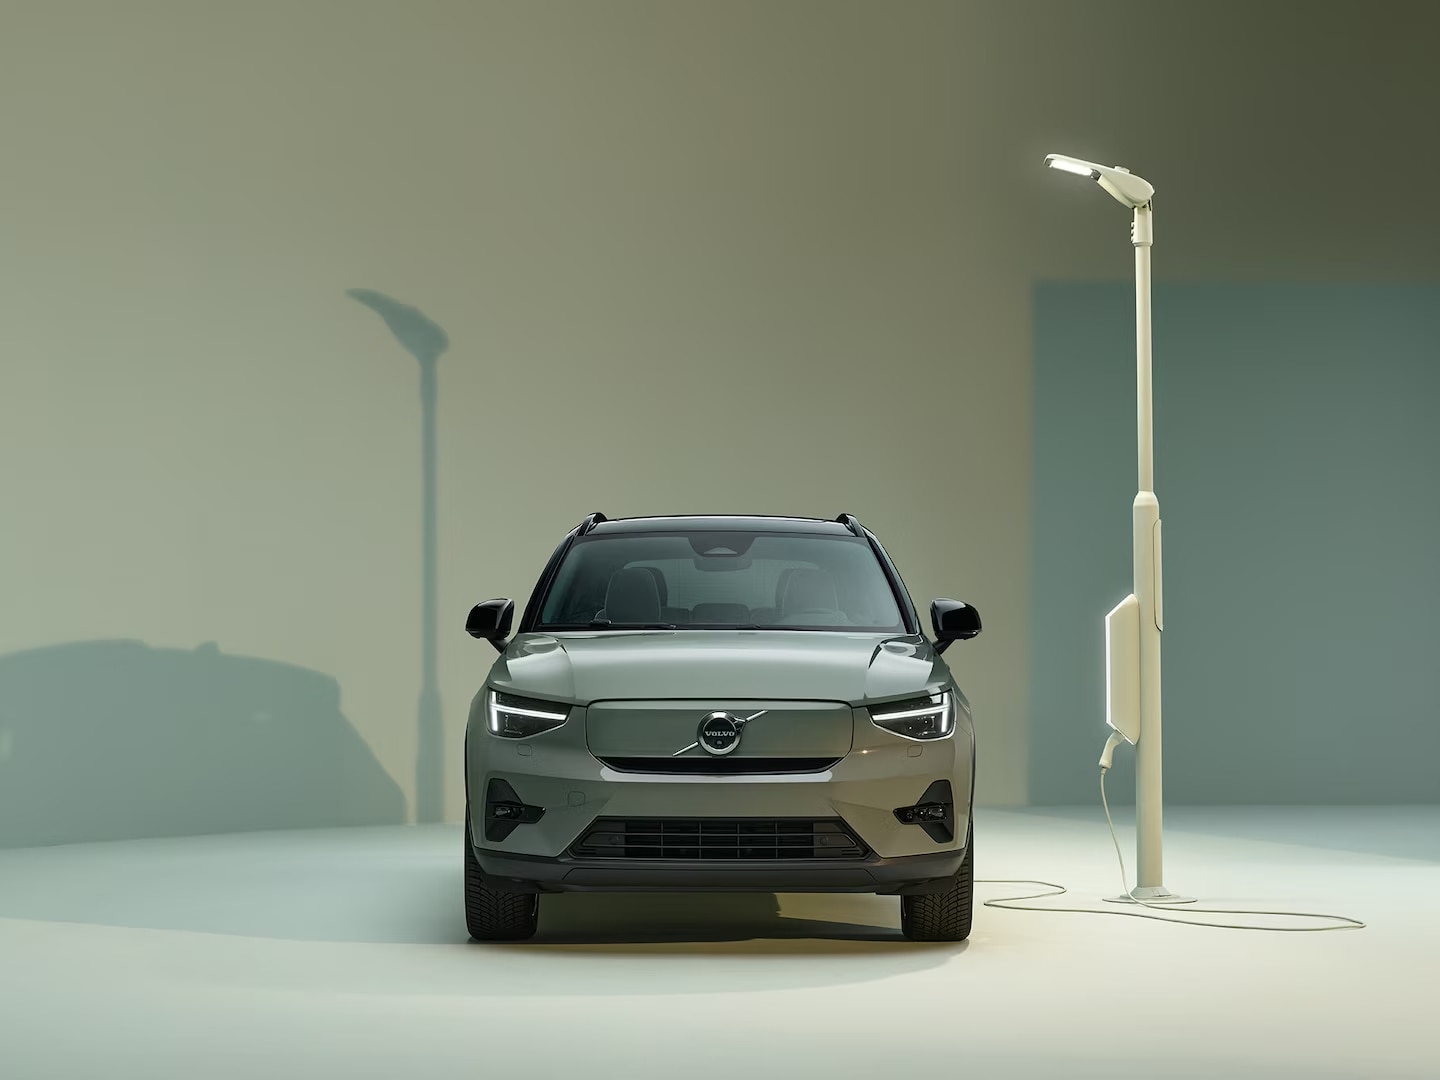 Volvo XC40 Recharge pure electric exterior front design with charger and charging station.